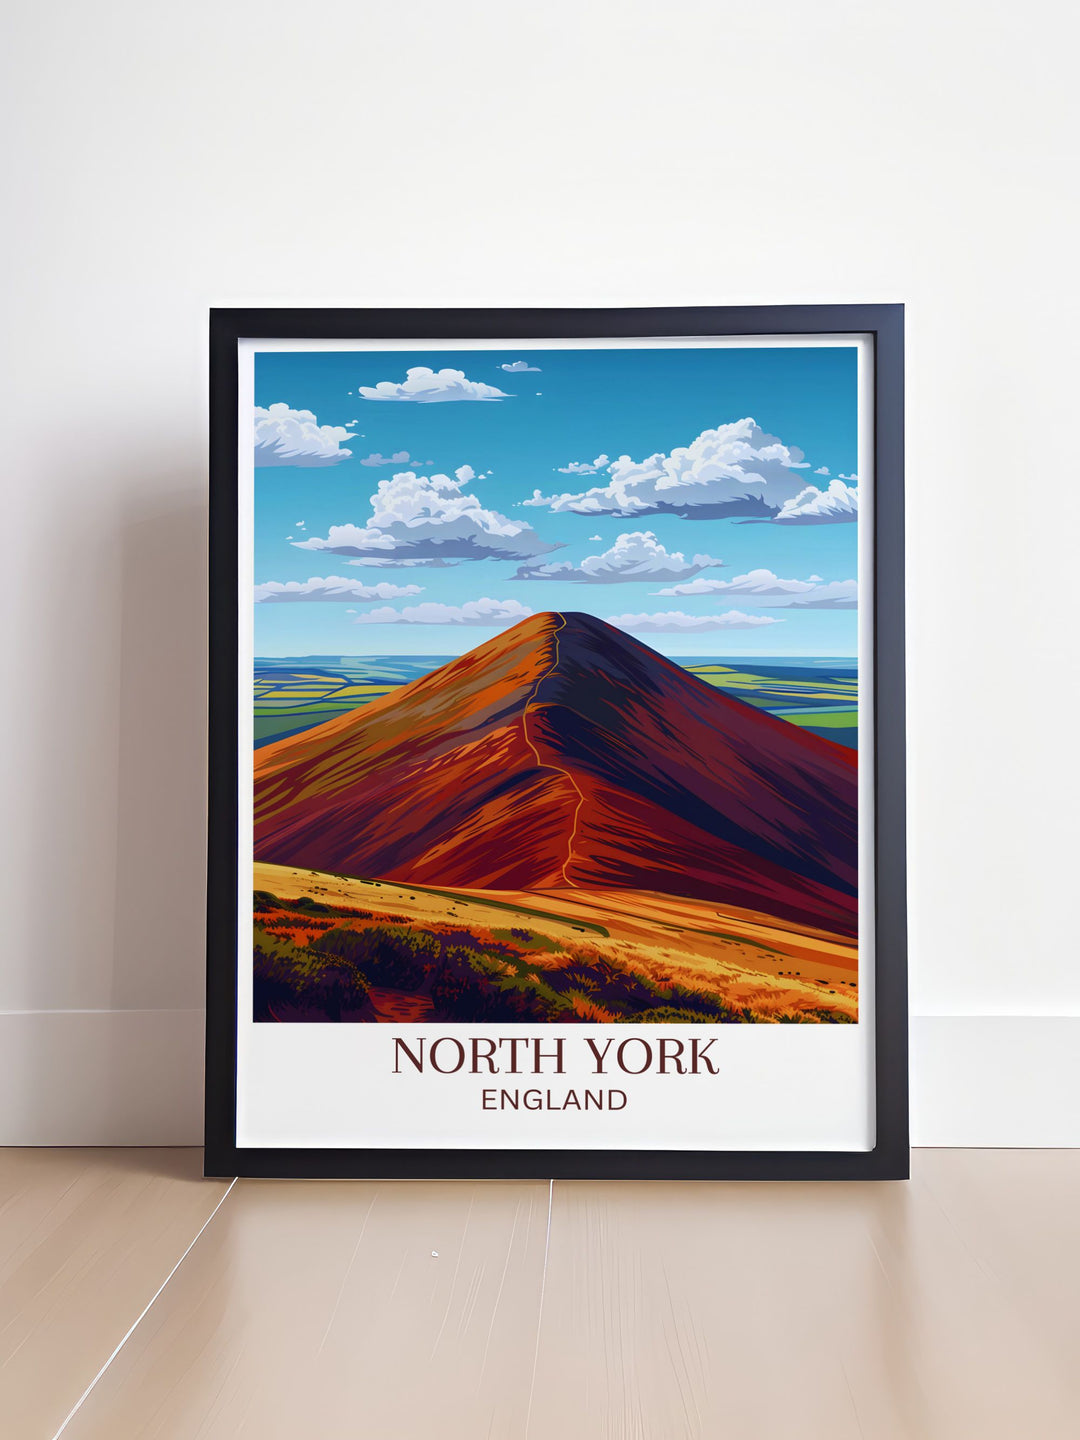 Experience the iconic silhouette of Roseberry Topping with this detailed art print, highlighting the striking profile and panoramic views that make it one of Yorkshires most beloved landmarks.